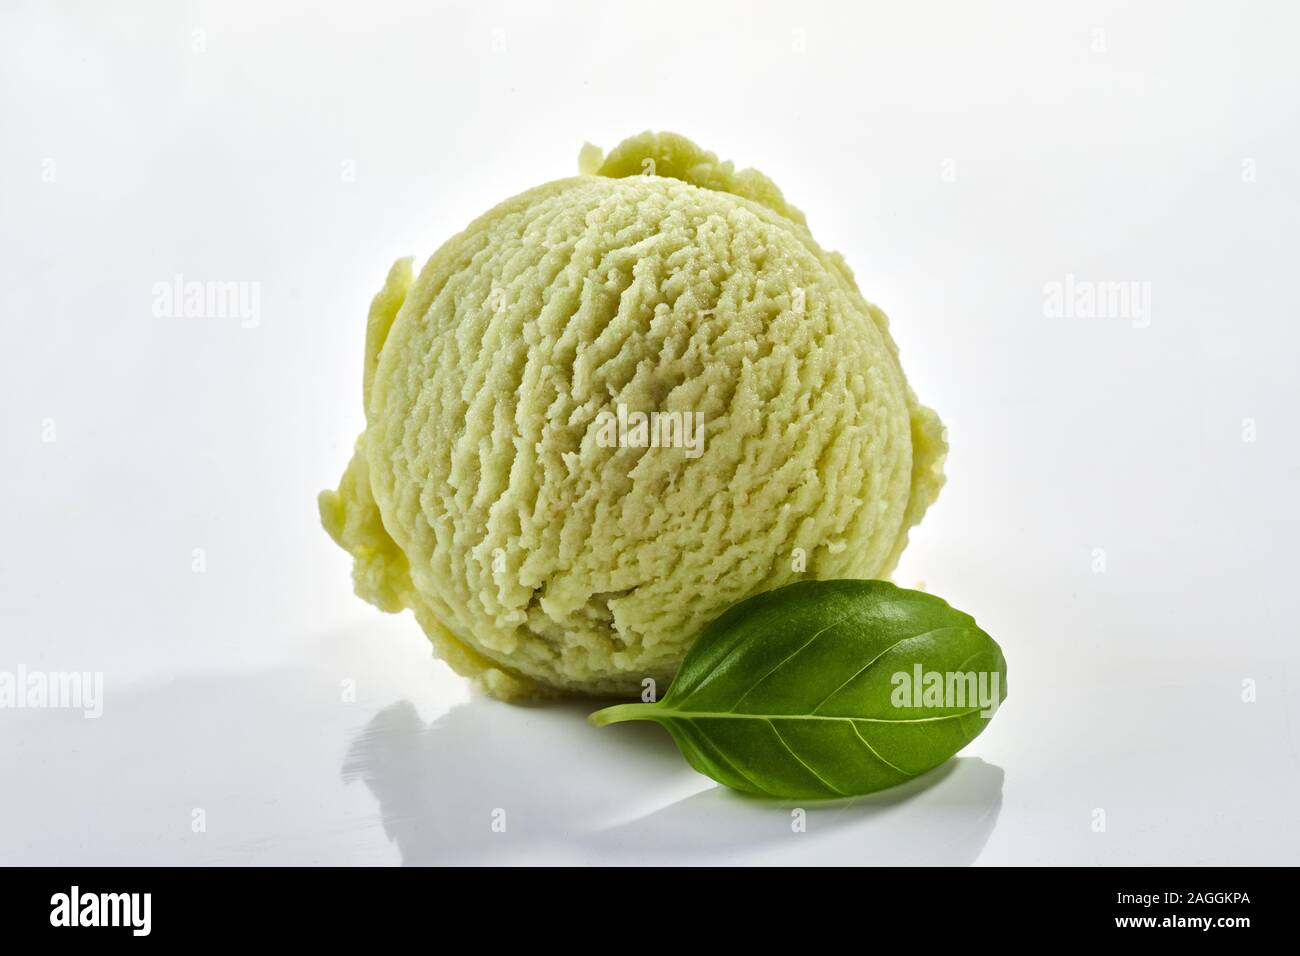 Single scoop of speciality herbal basil ice-cream with a fresh green leaf on a white background with shadow in close up Stock Photo